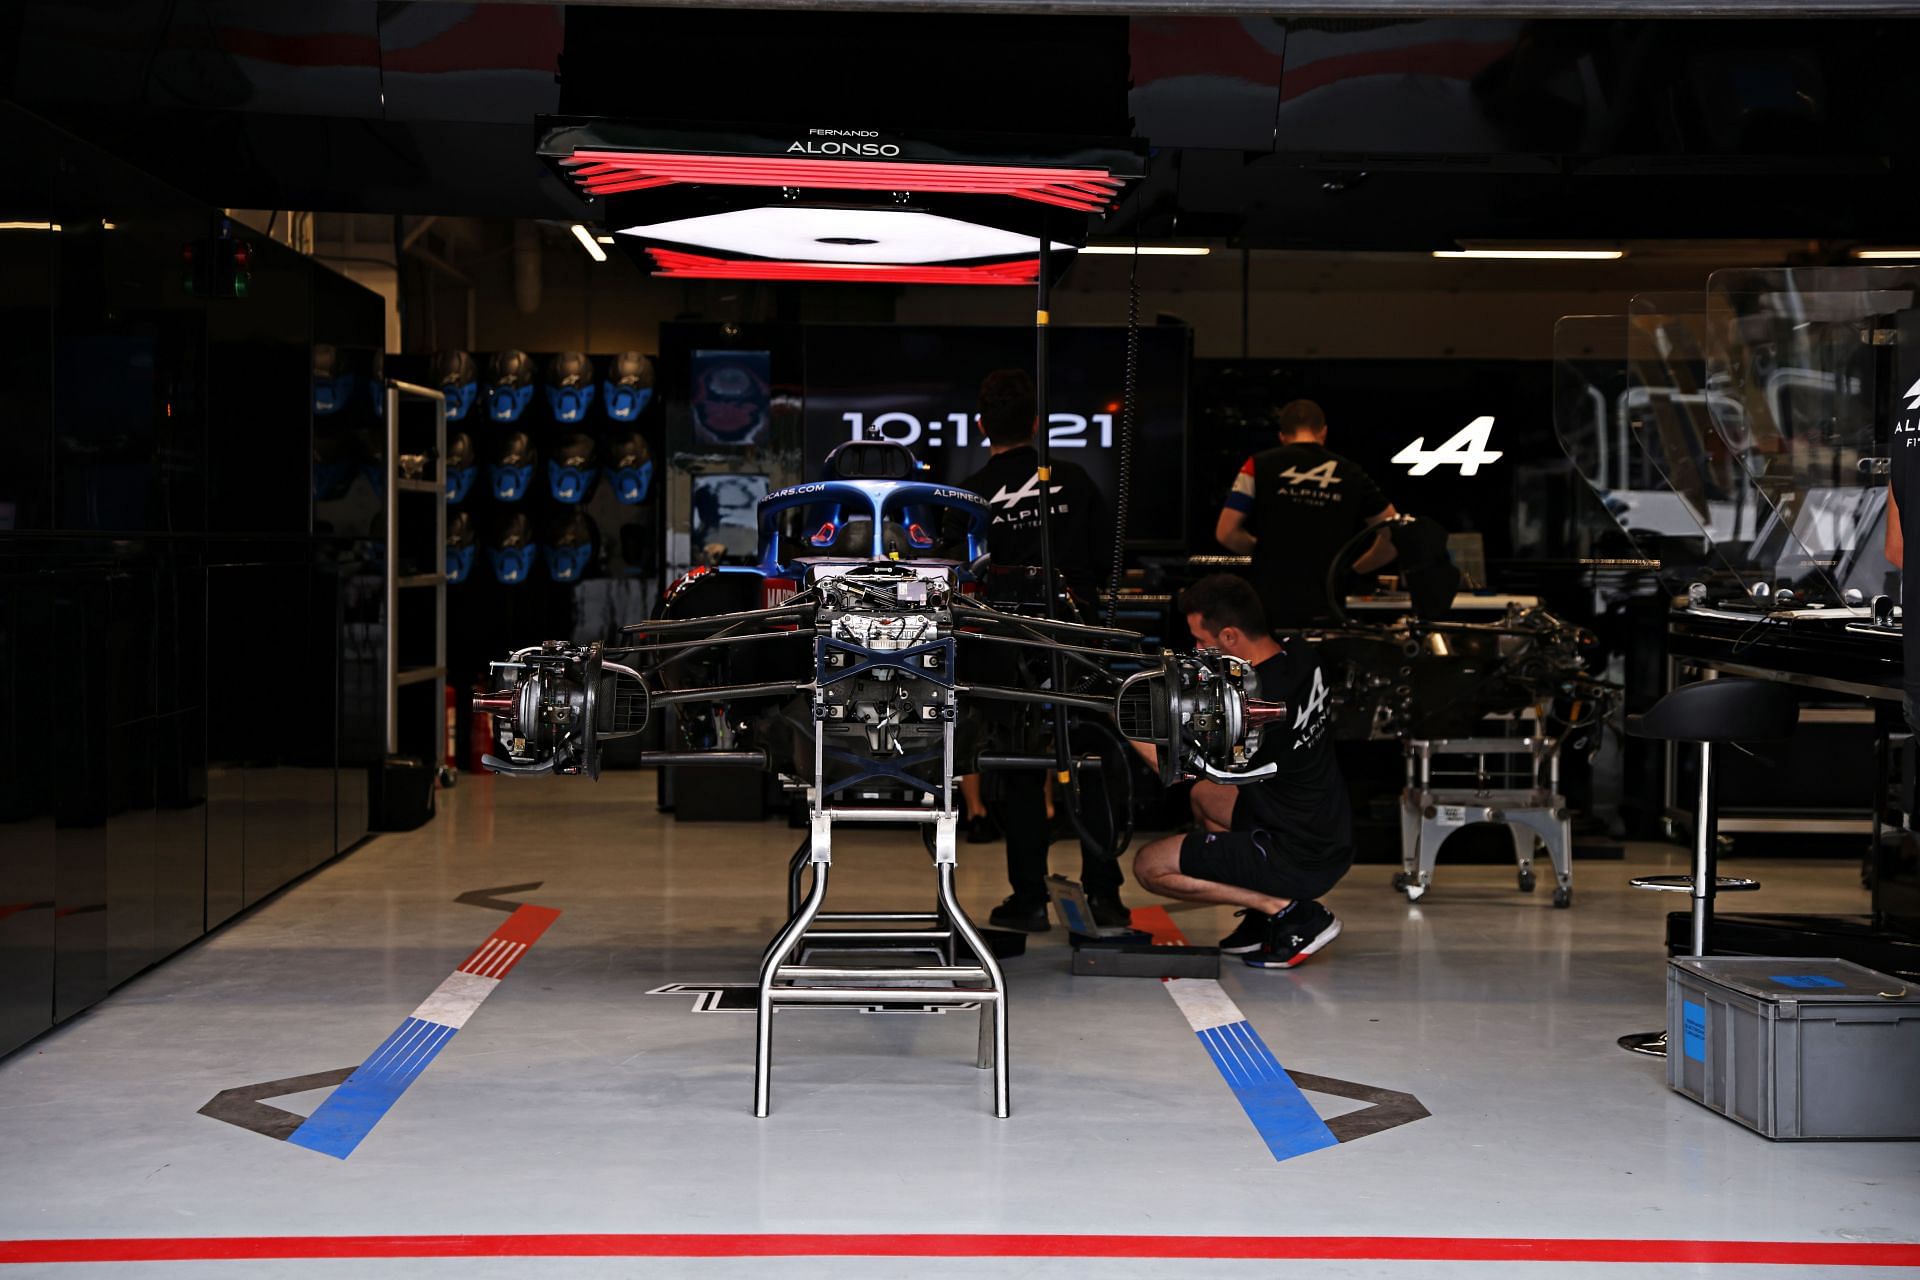 The Alpine F1 Team works in the garage ahead of an F1 race (Photo by Buda Mendes/Getty Images)